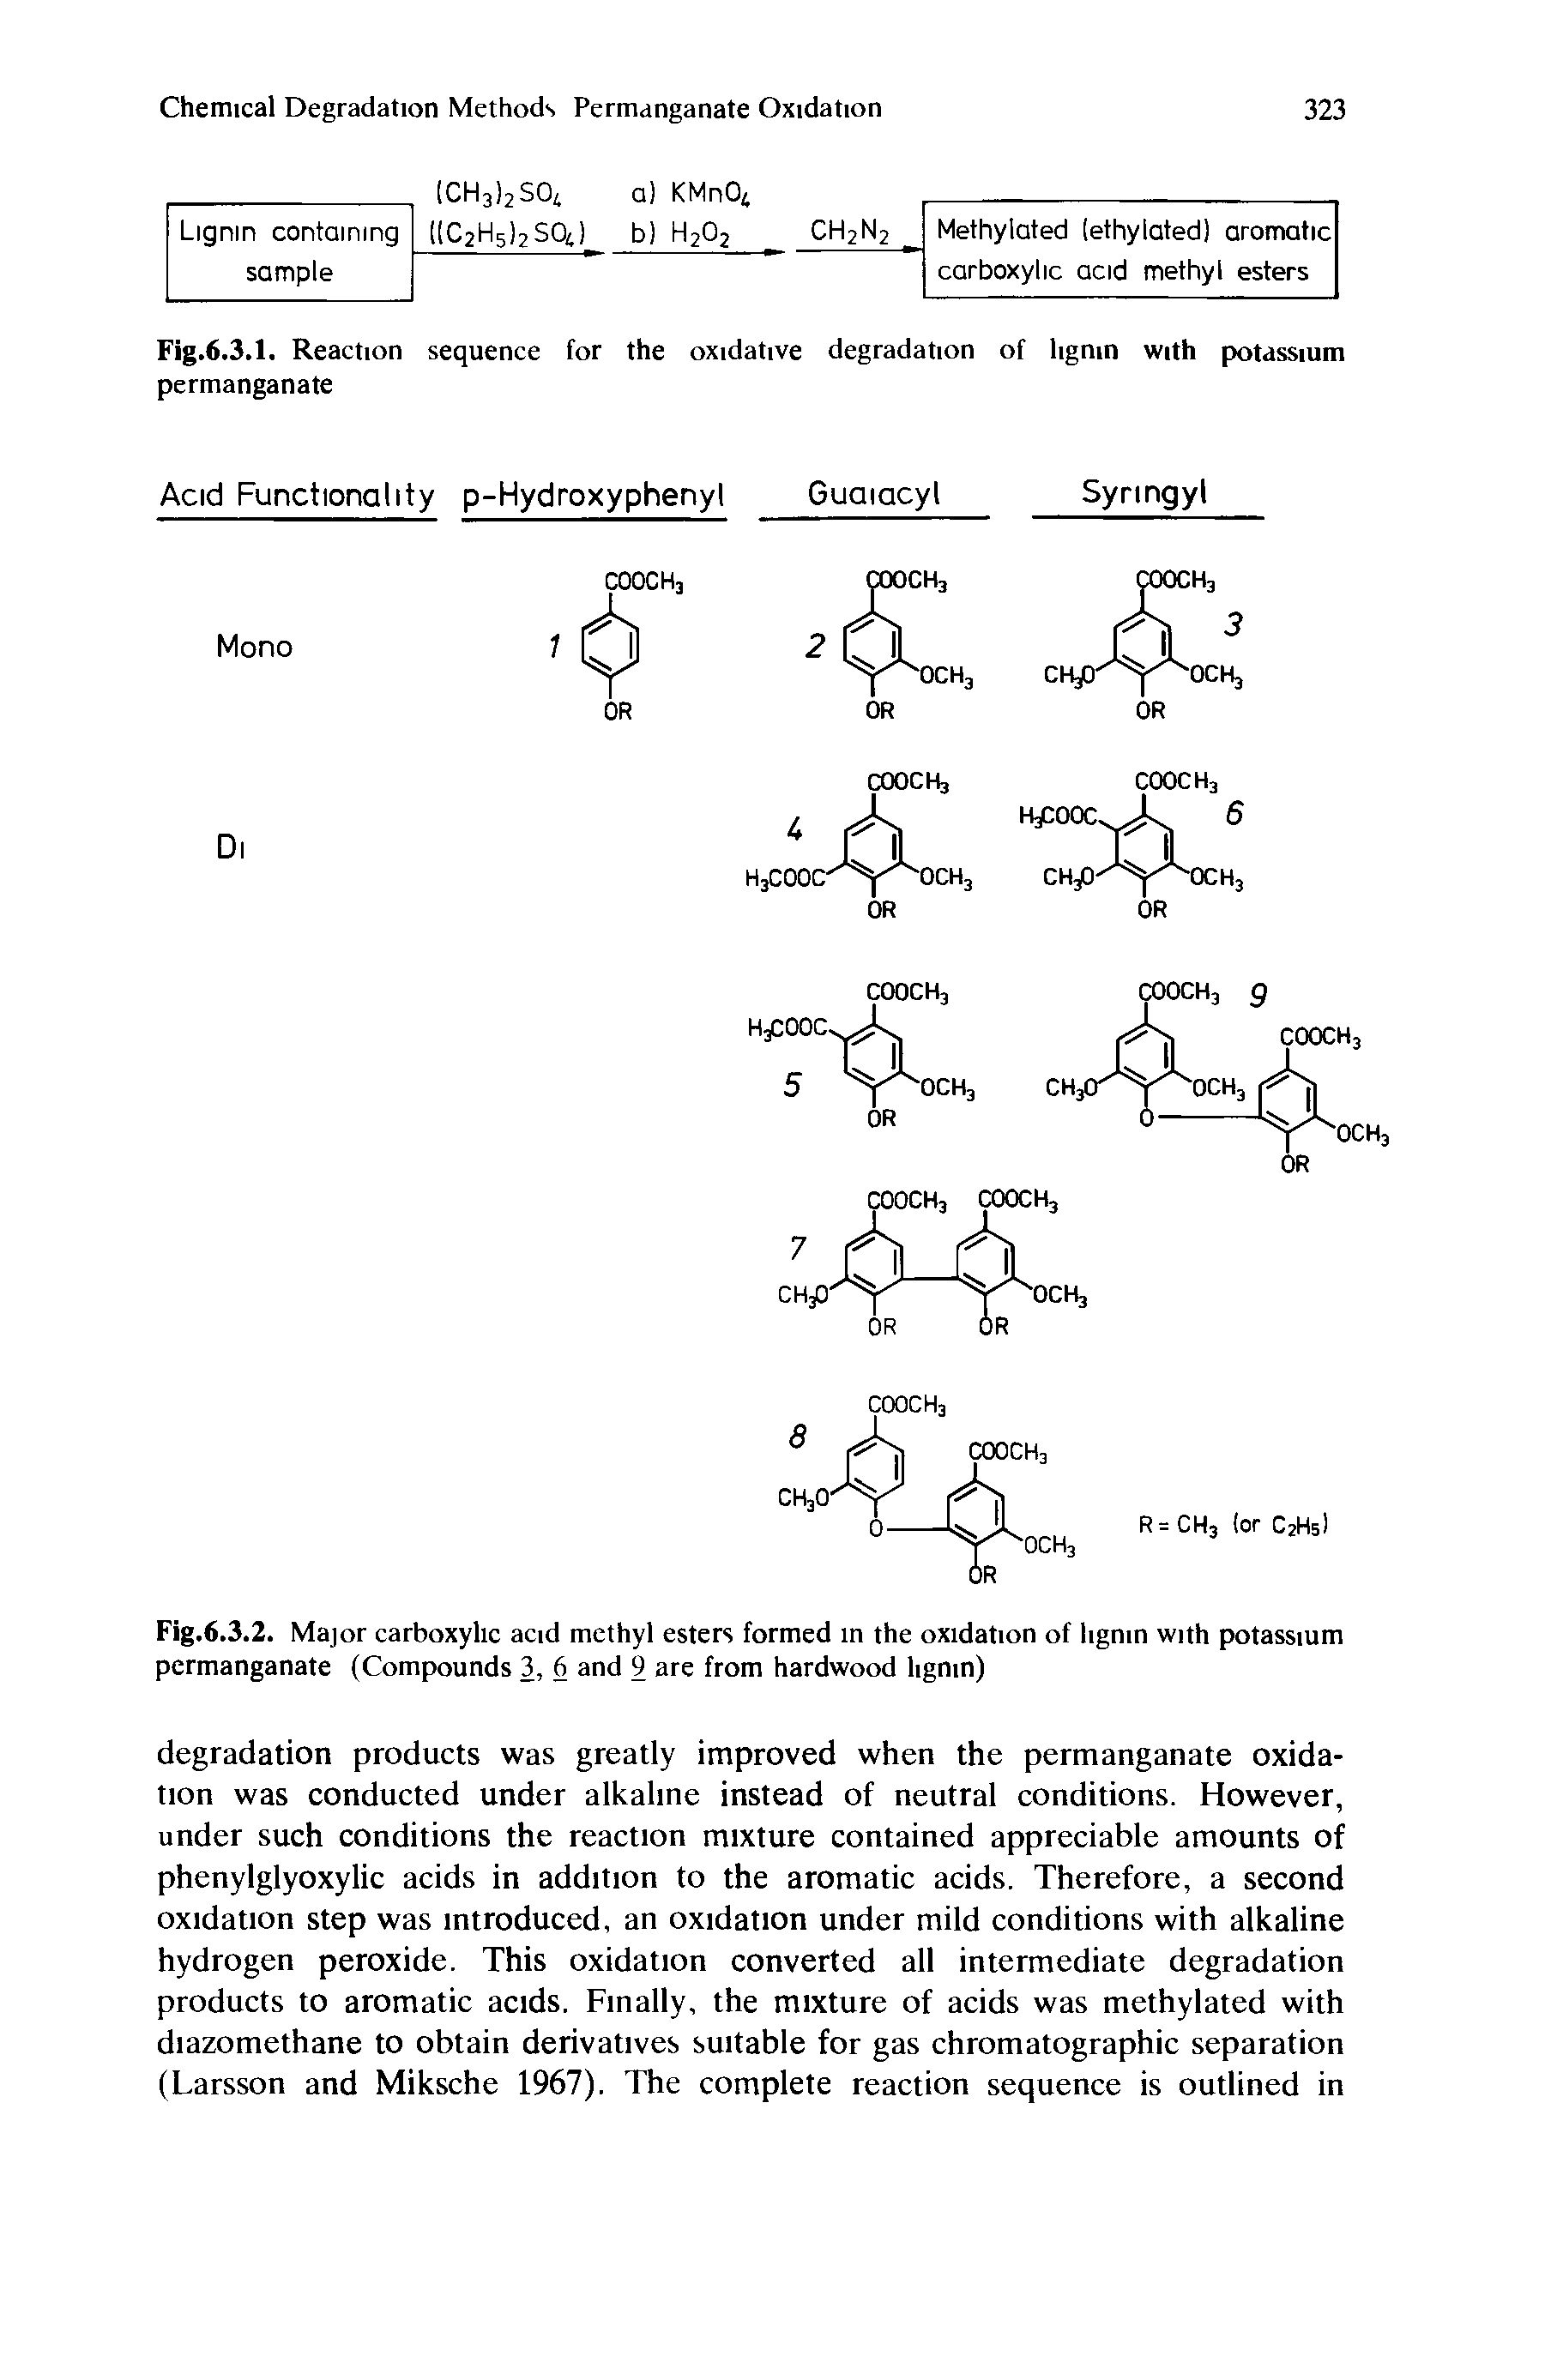 Fig.6.3.1. Reaction sequence for the oxidative degradation of lignin with potassium permanganate...